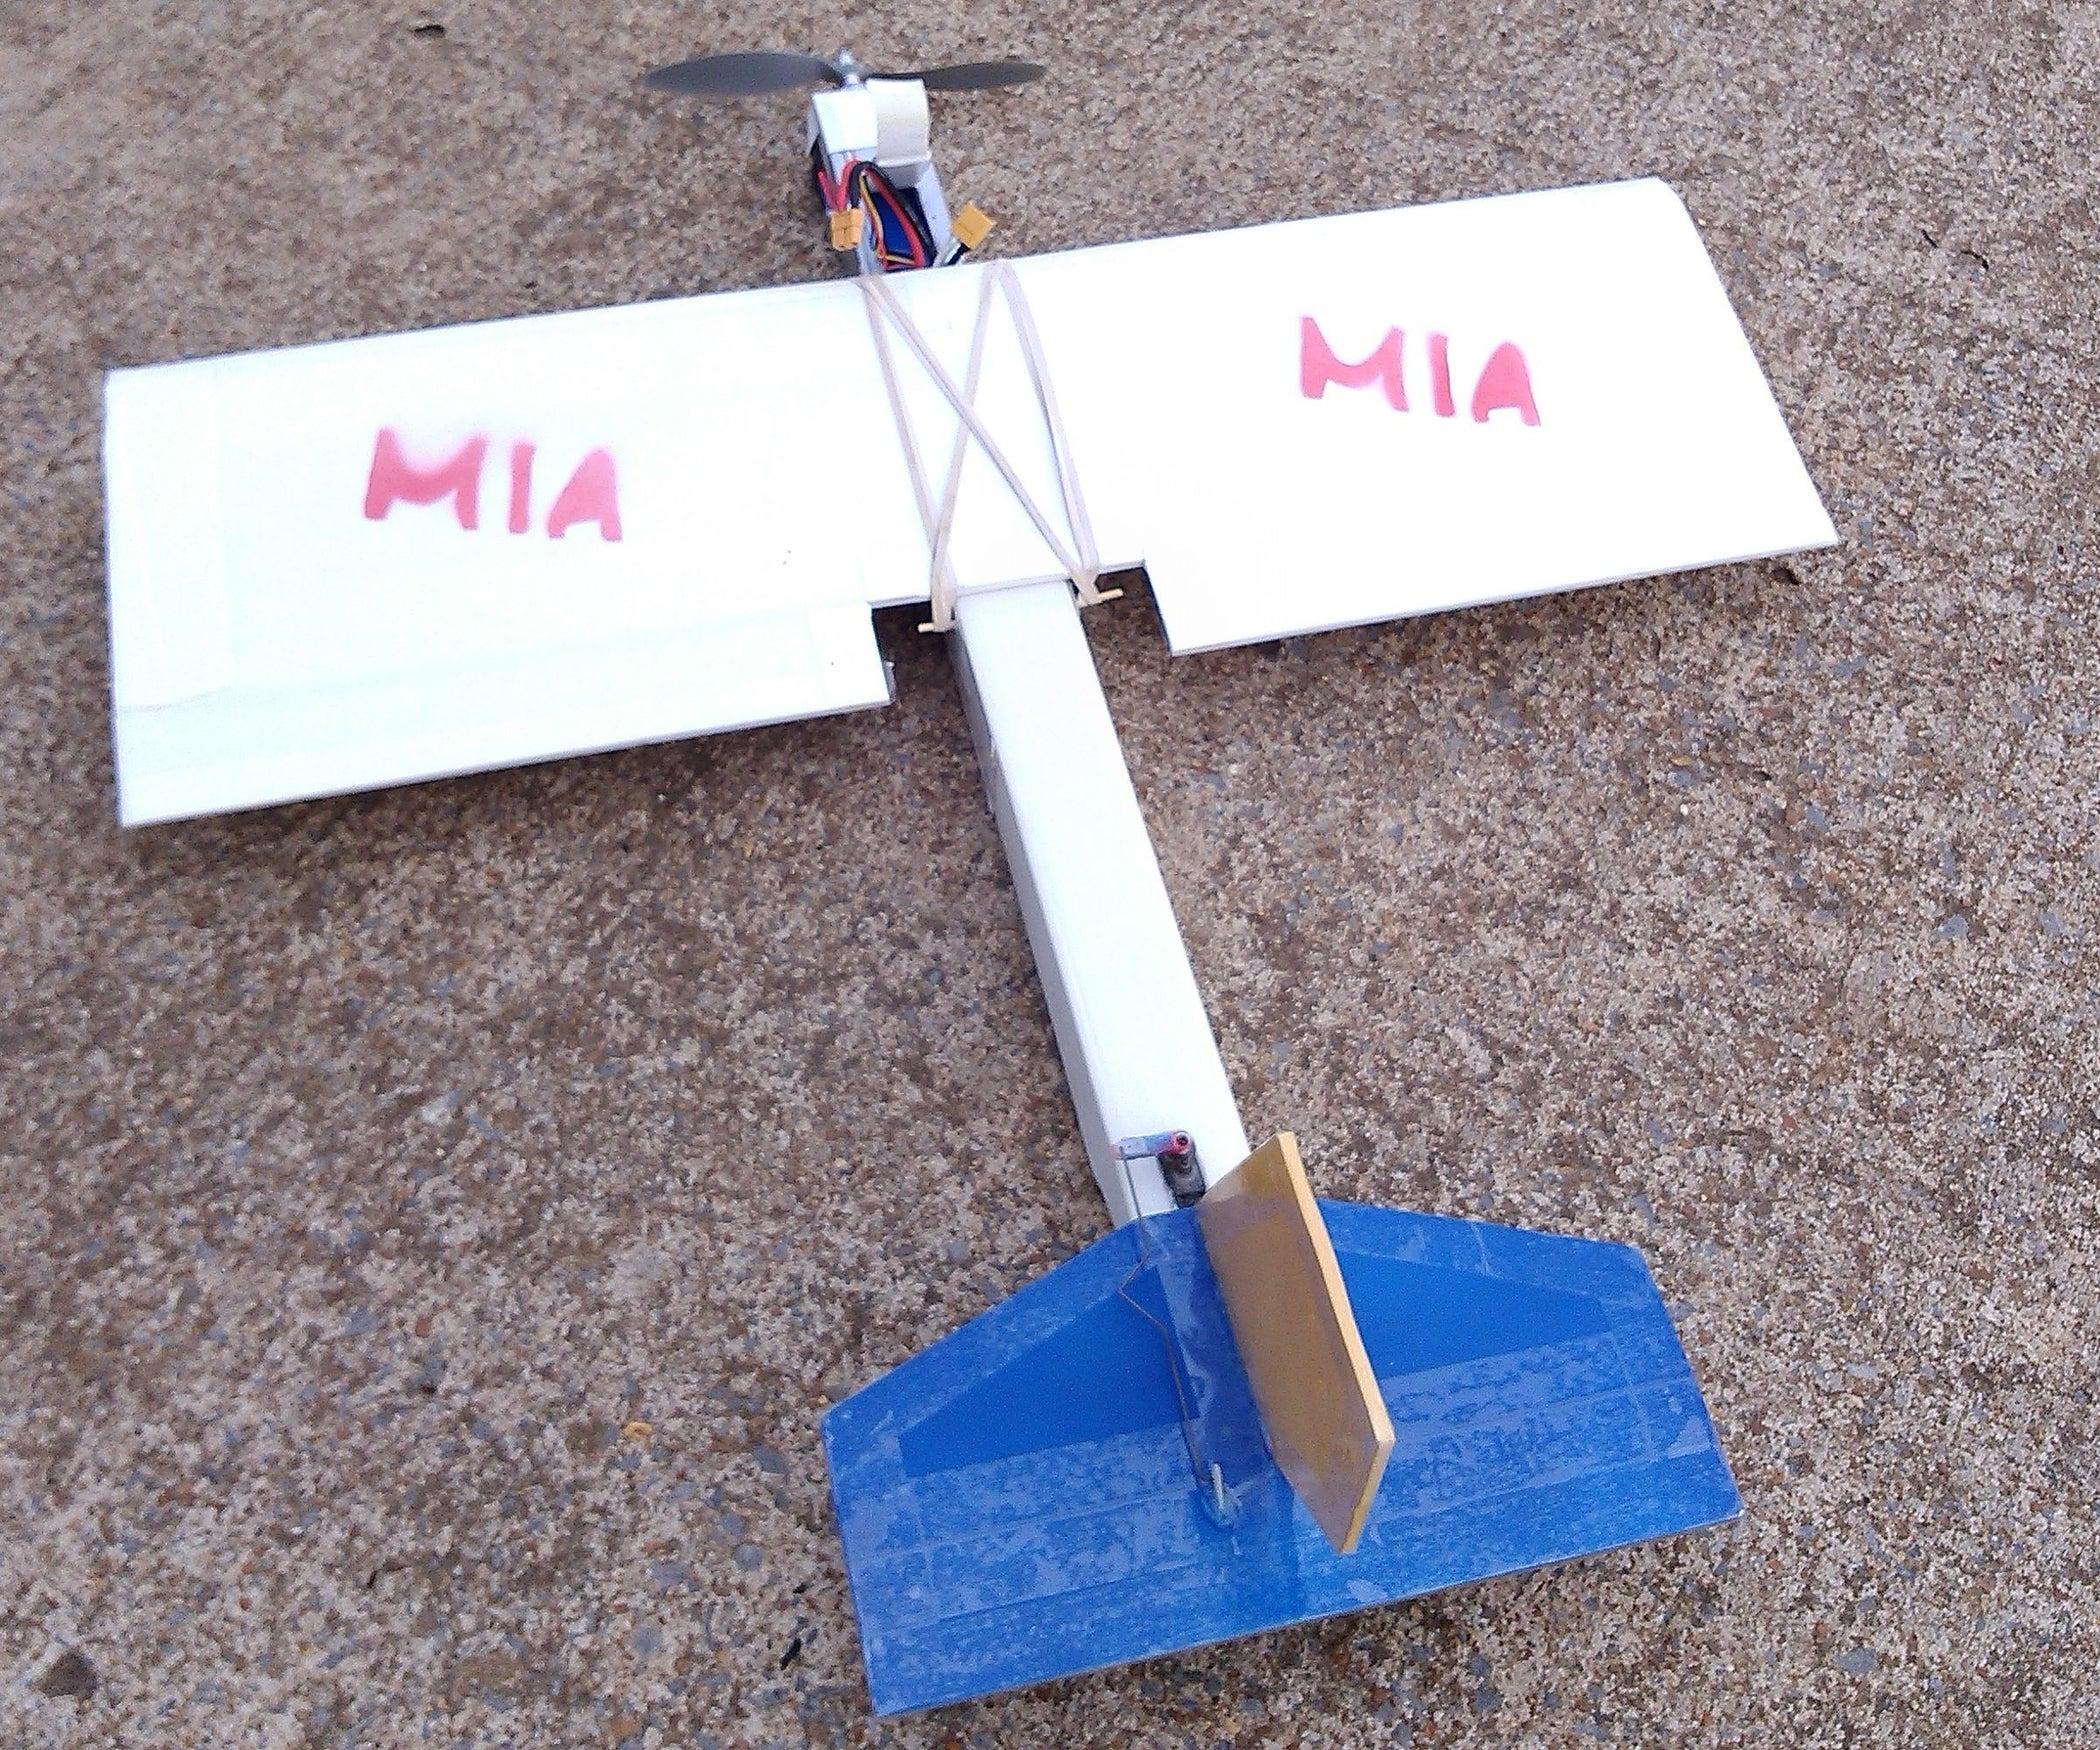 Cheap Foam Rc Plane:  Check wind conditions before flying to avoid crashes